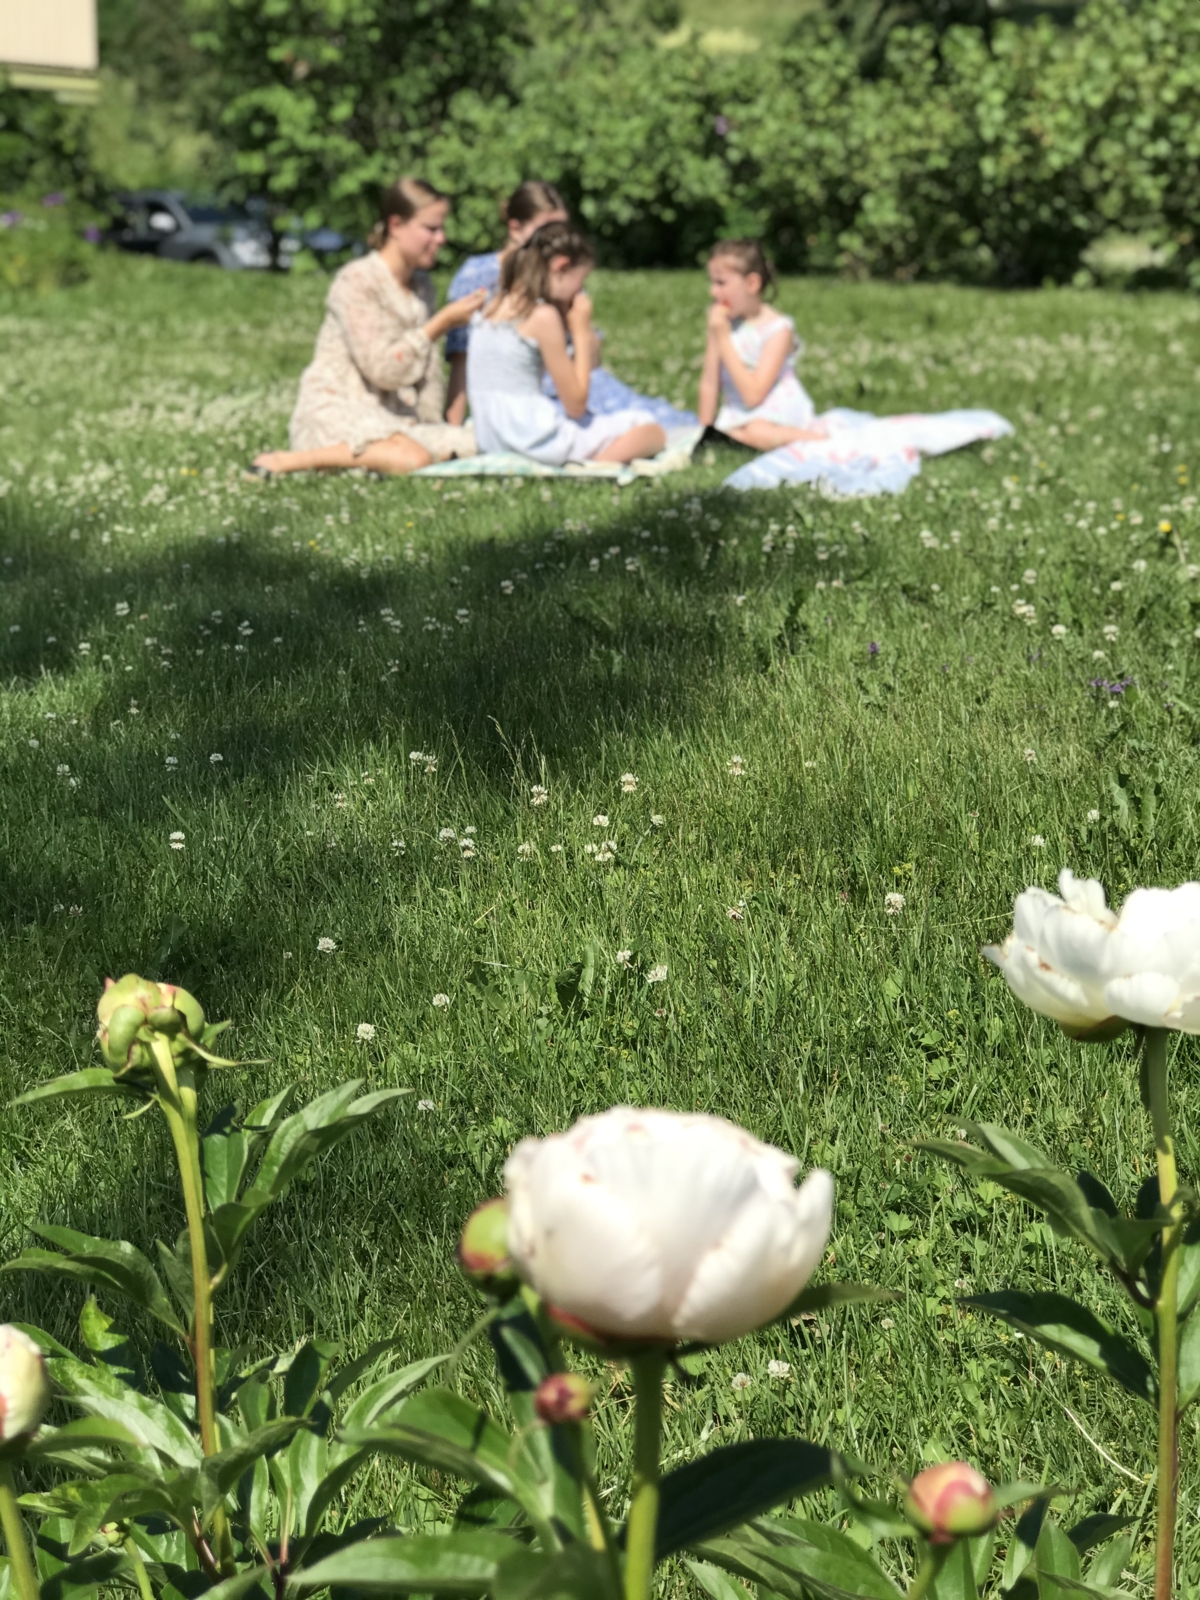 Bring a blanket and have a picnic in the garden at&nbsp;Aulestad. Photo: Aulestad

